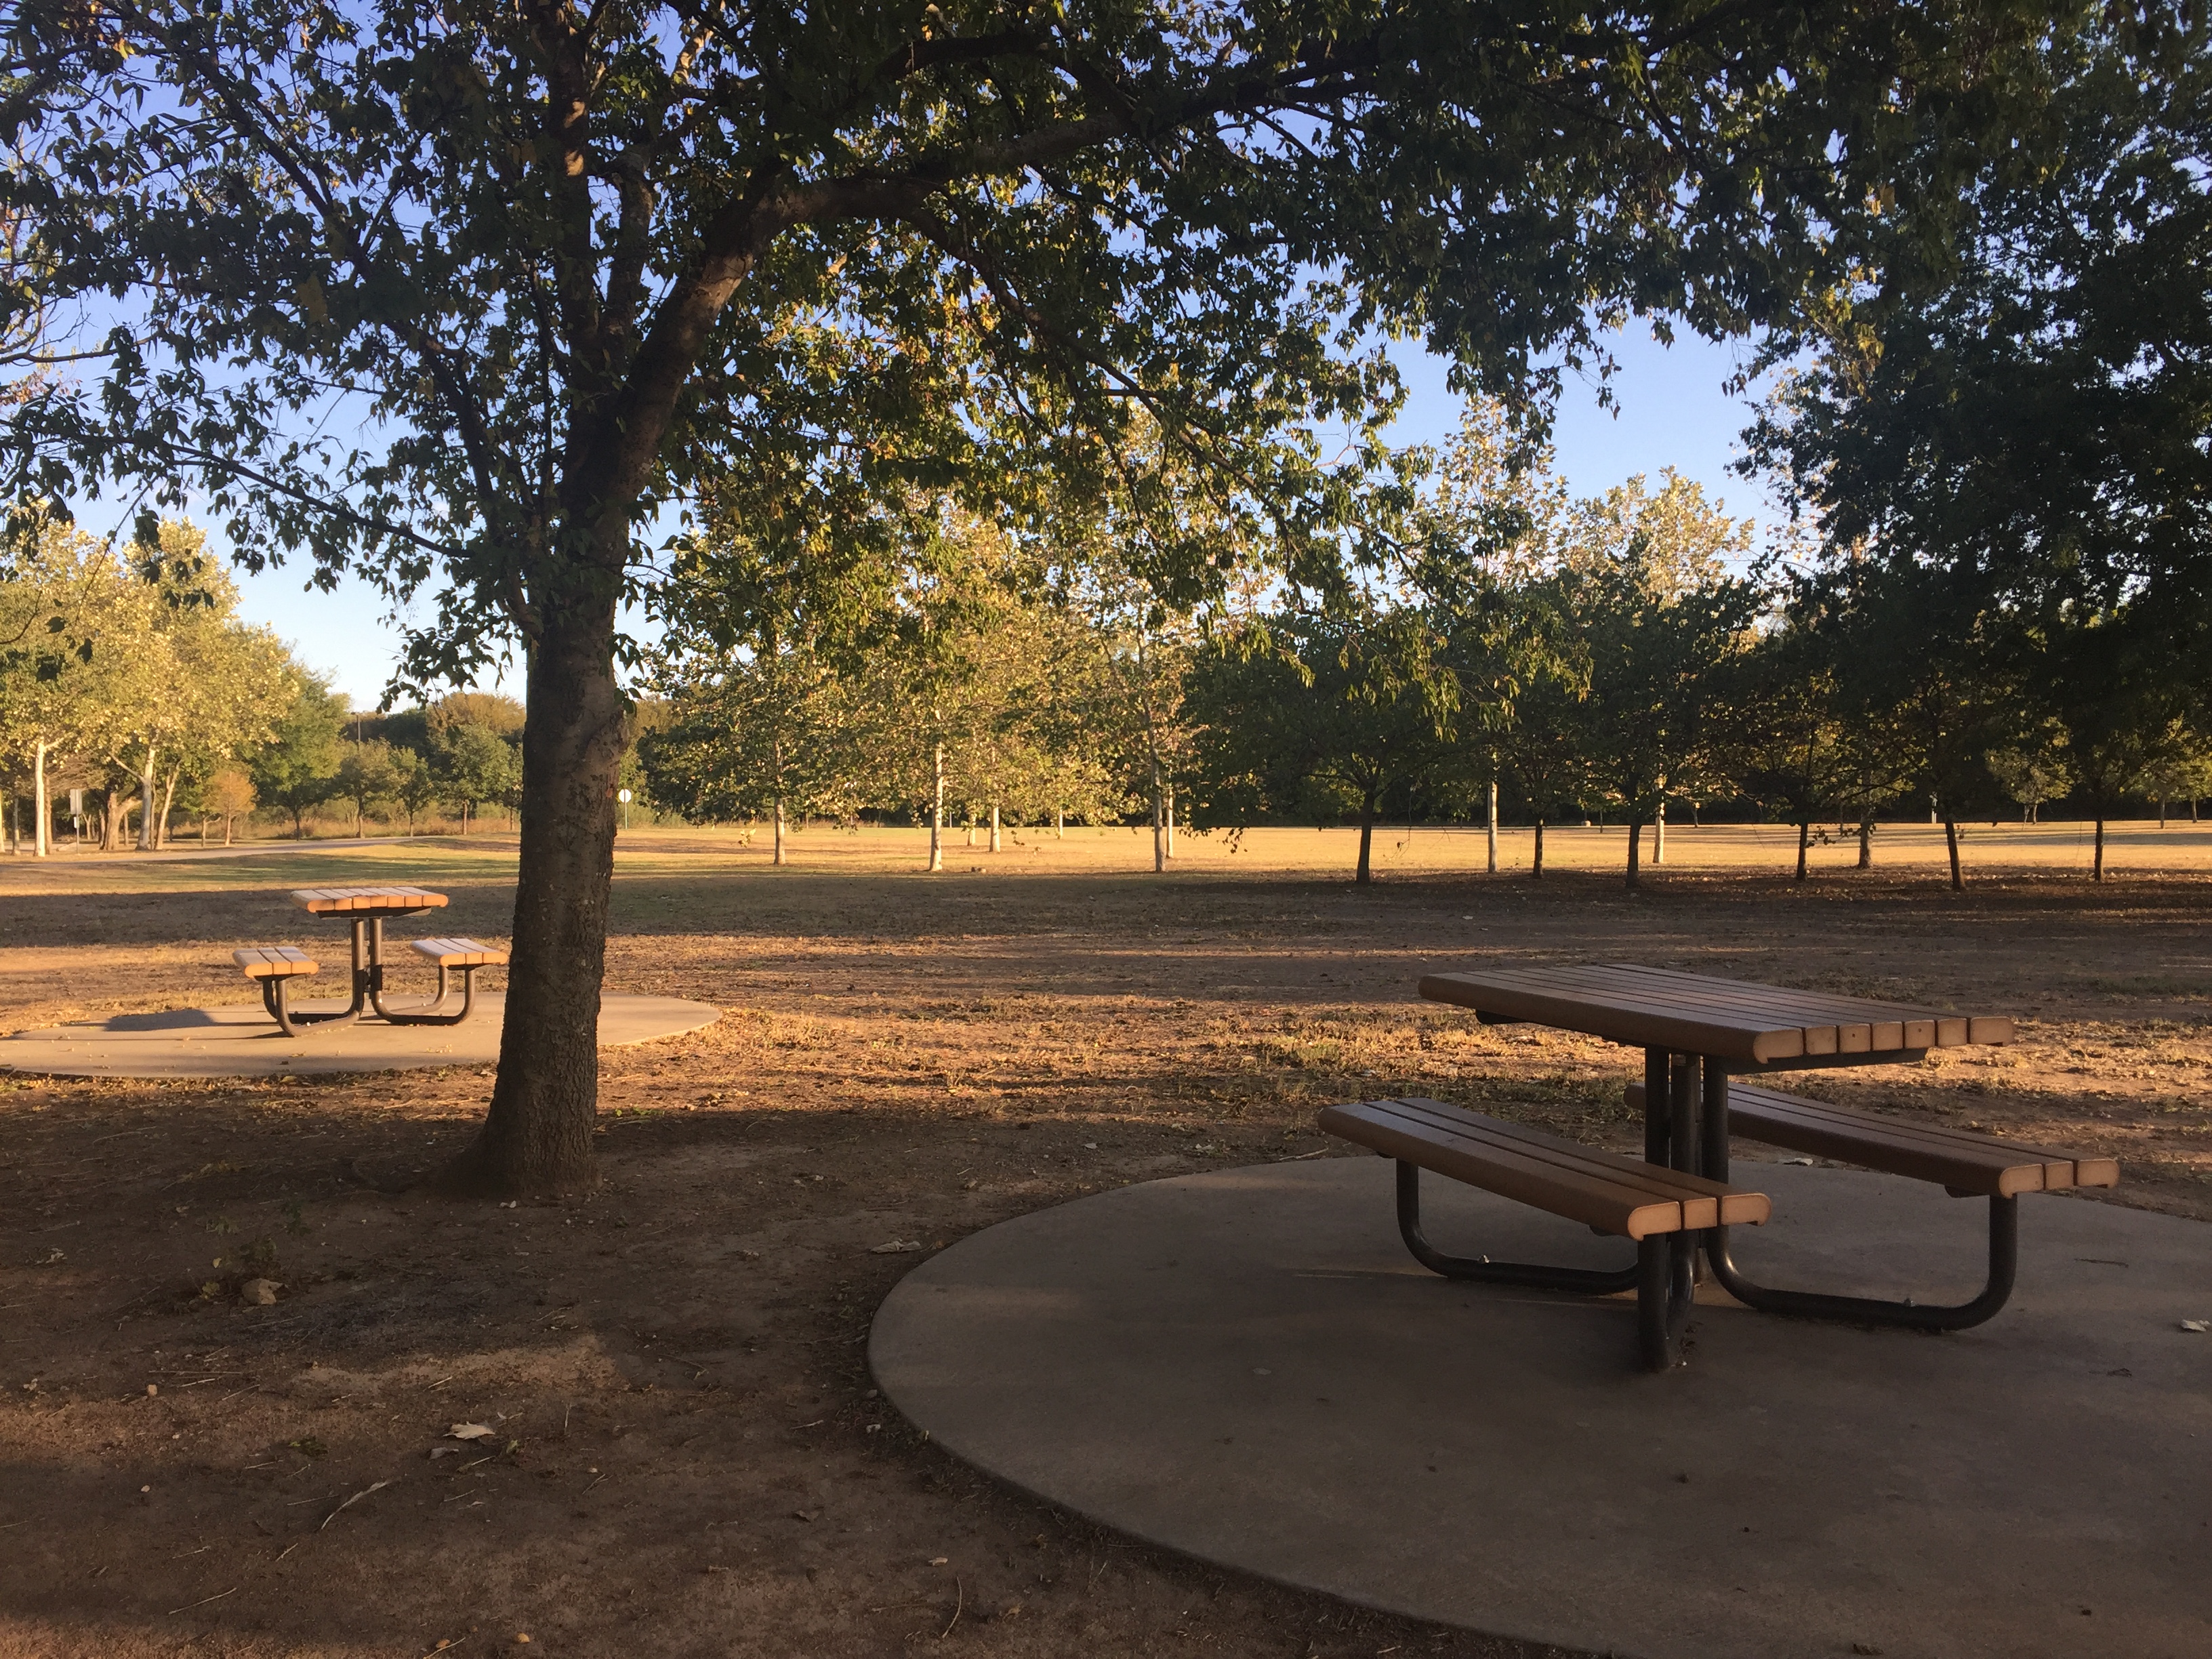 Picnic area on The Great Lawn